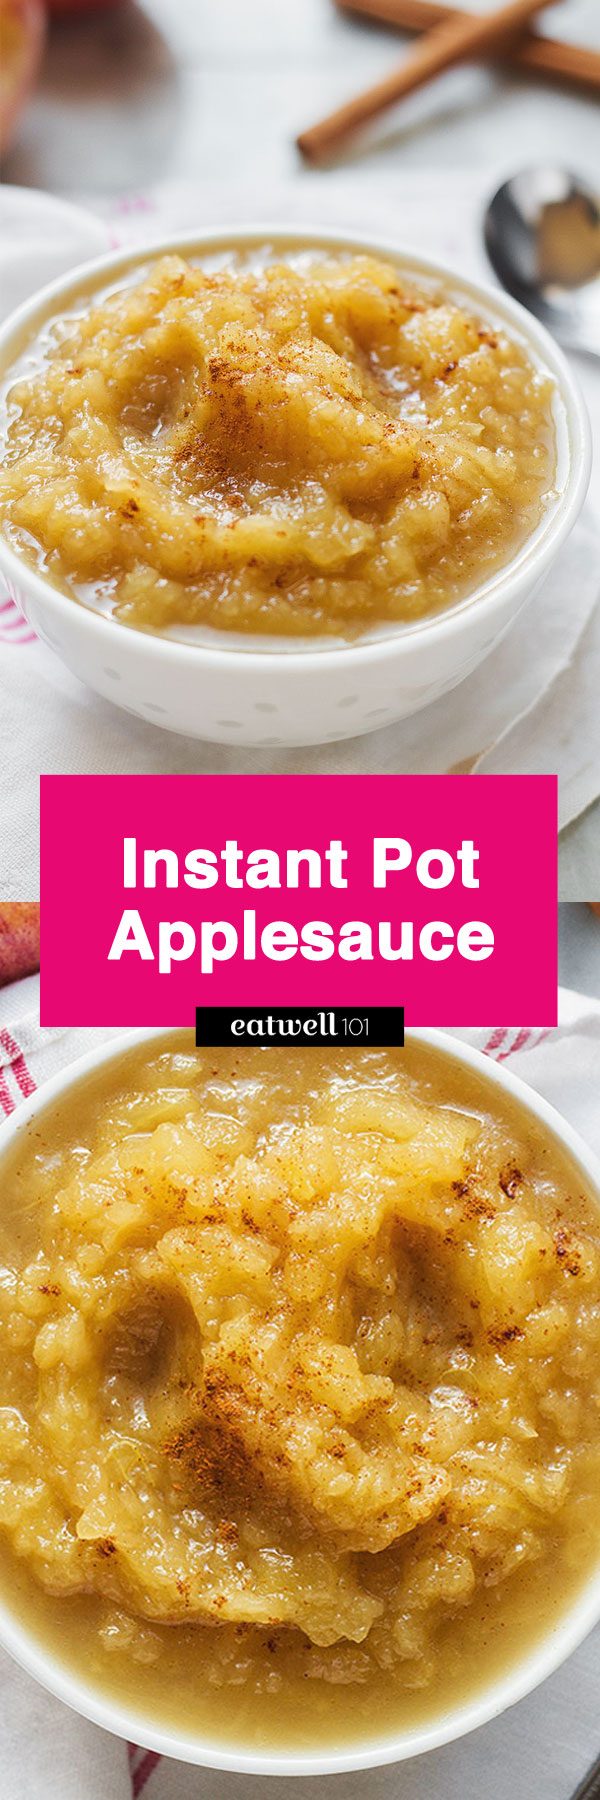 Instant Pot Applesauce — If you love homemade applesauce, you’ve got to try this method. Absolutely delicious and comes out perfect every time!